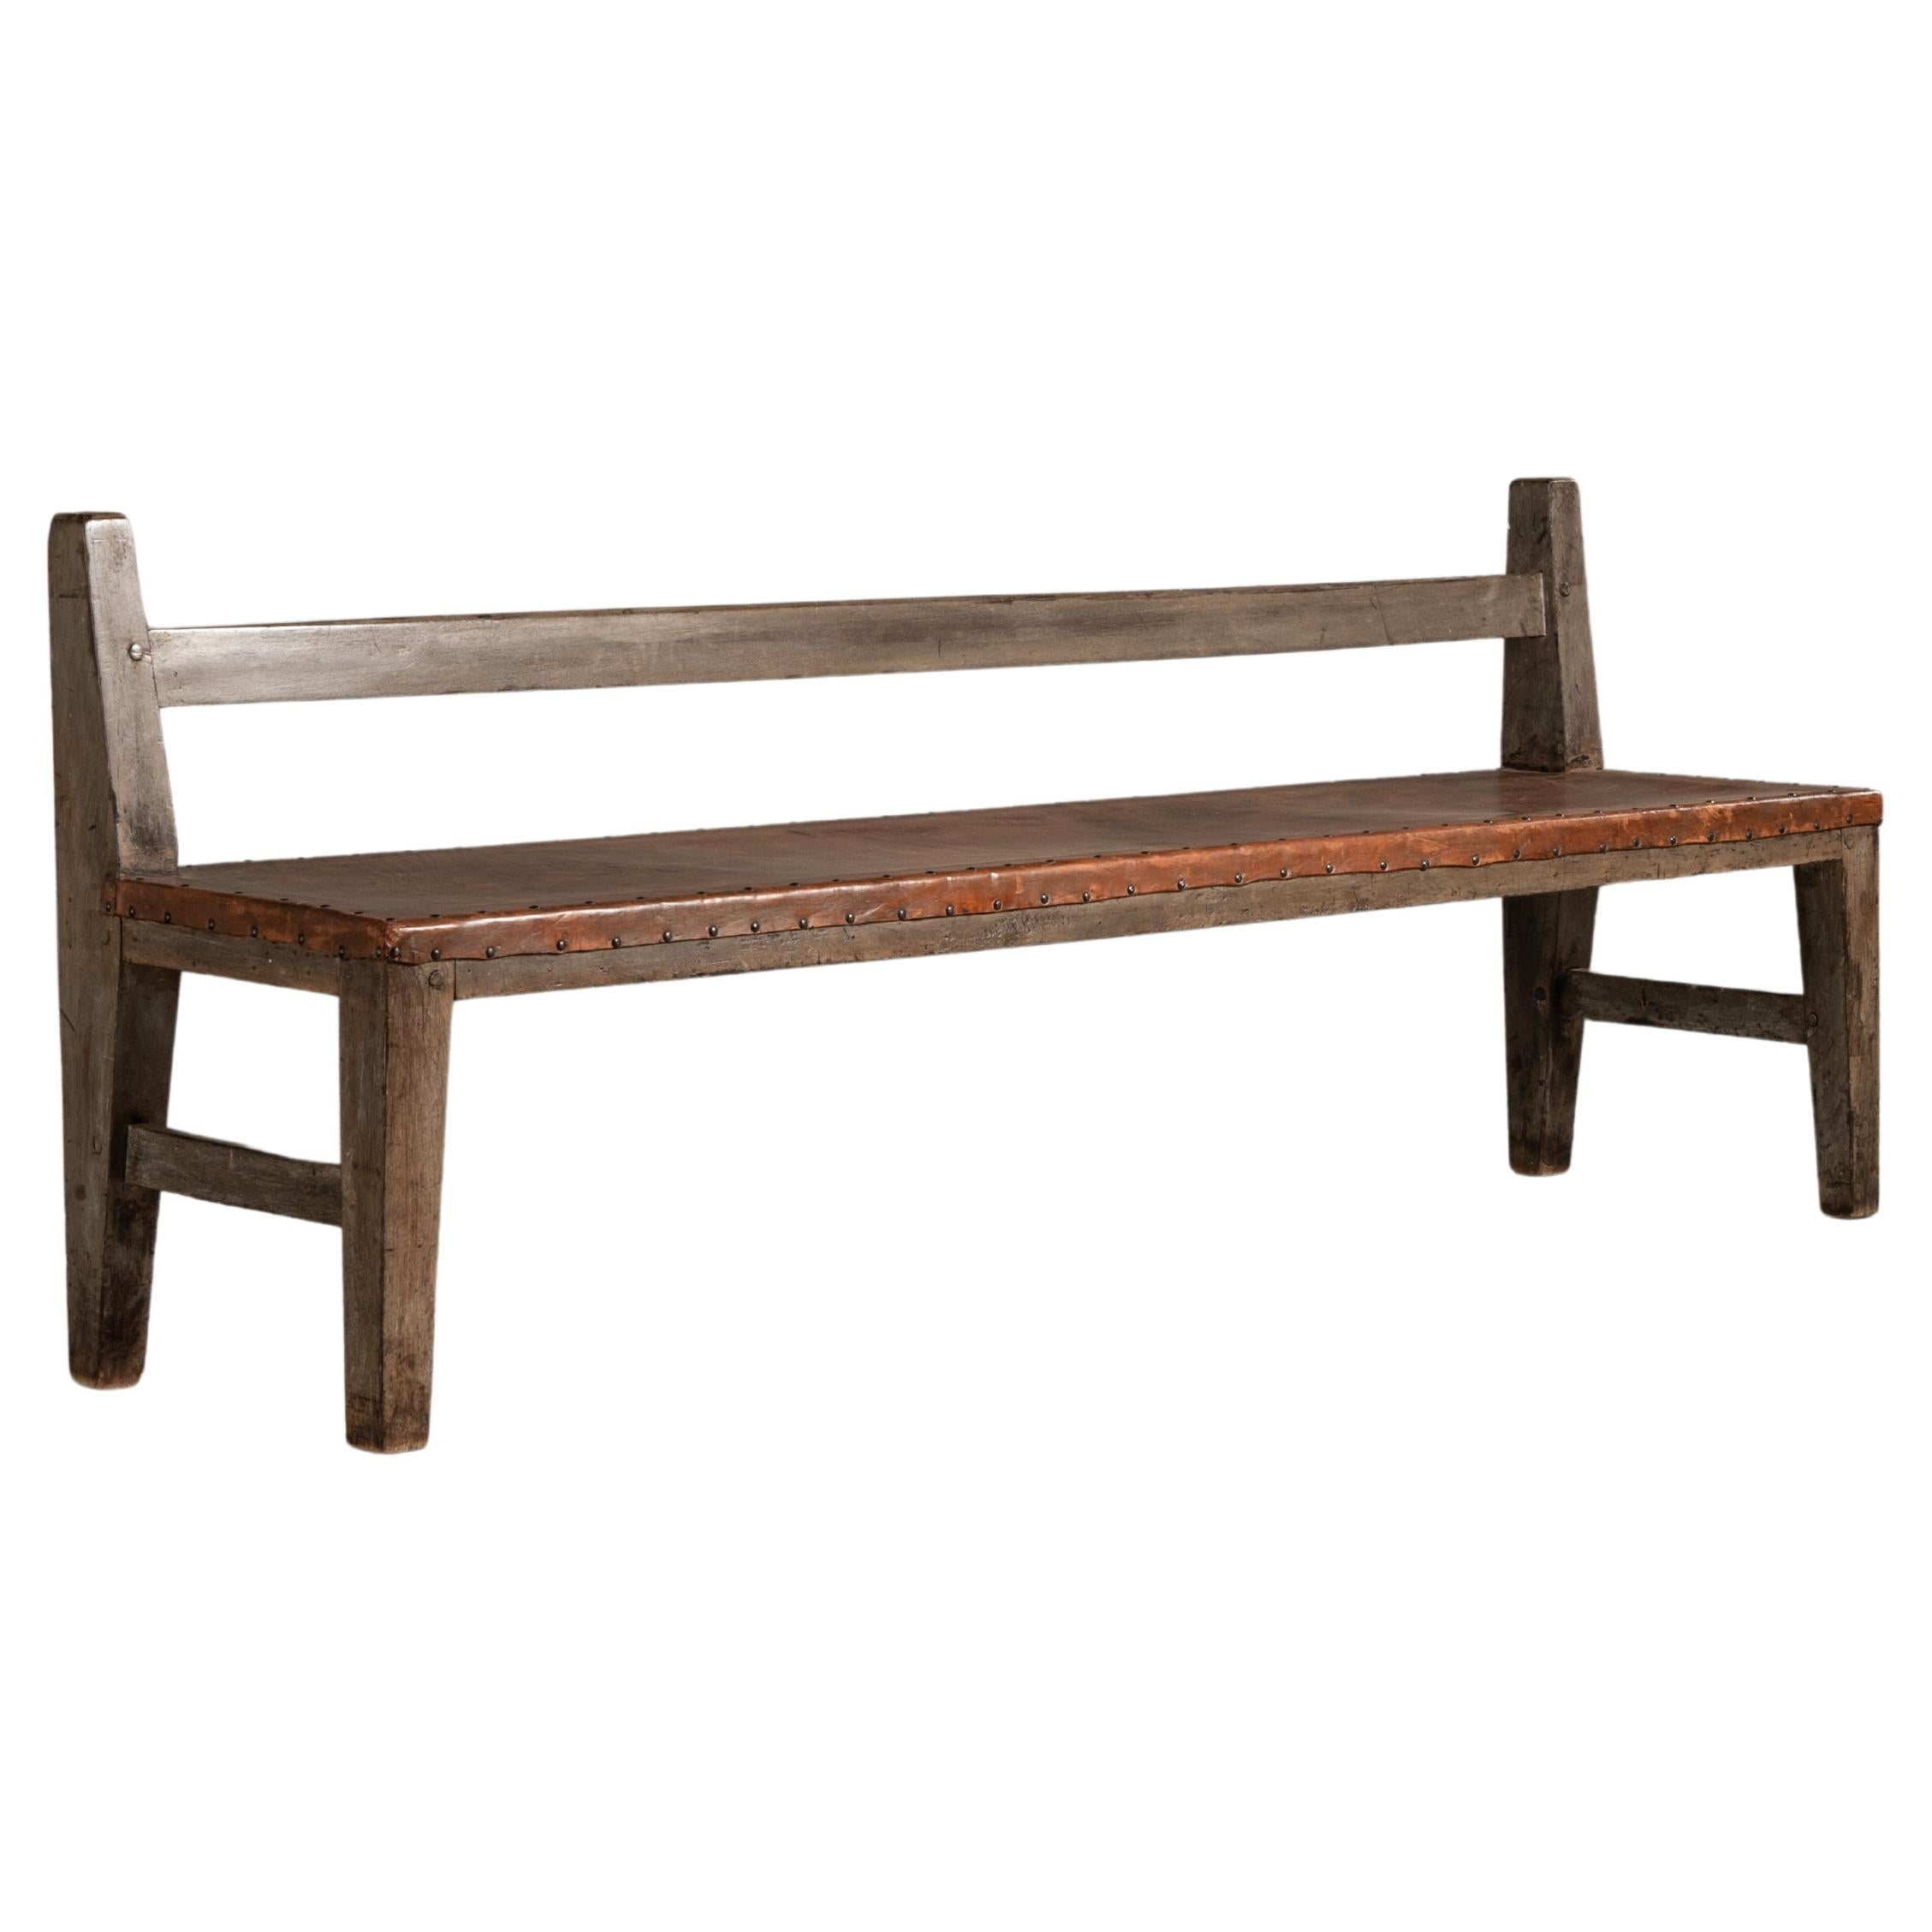 Patinated 19th Century Bench in Solid Wood and Leather, Brazilian Design